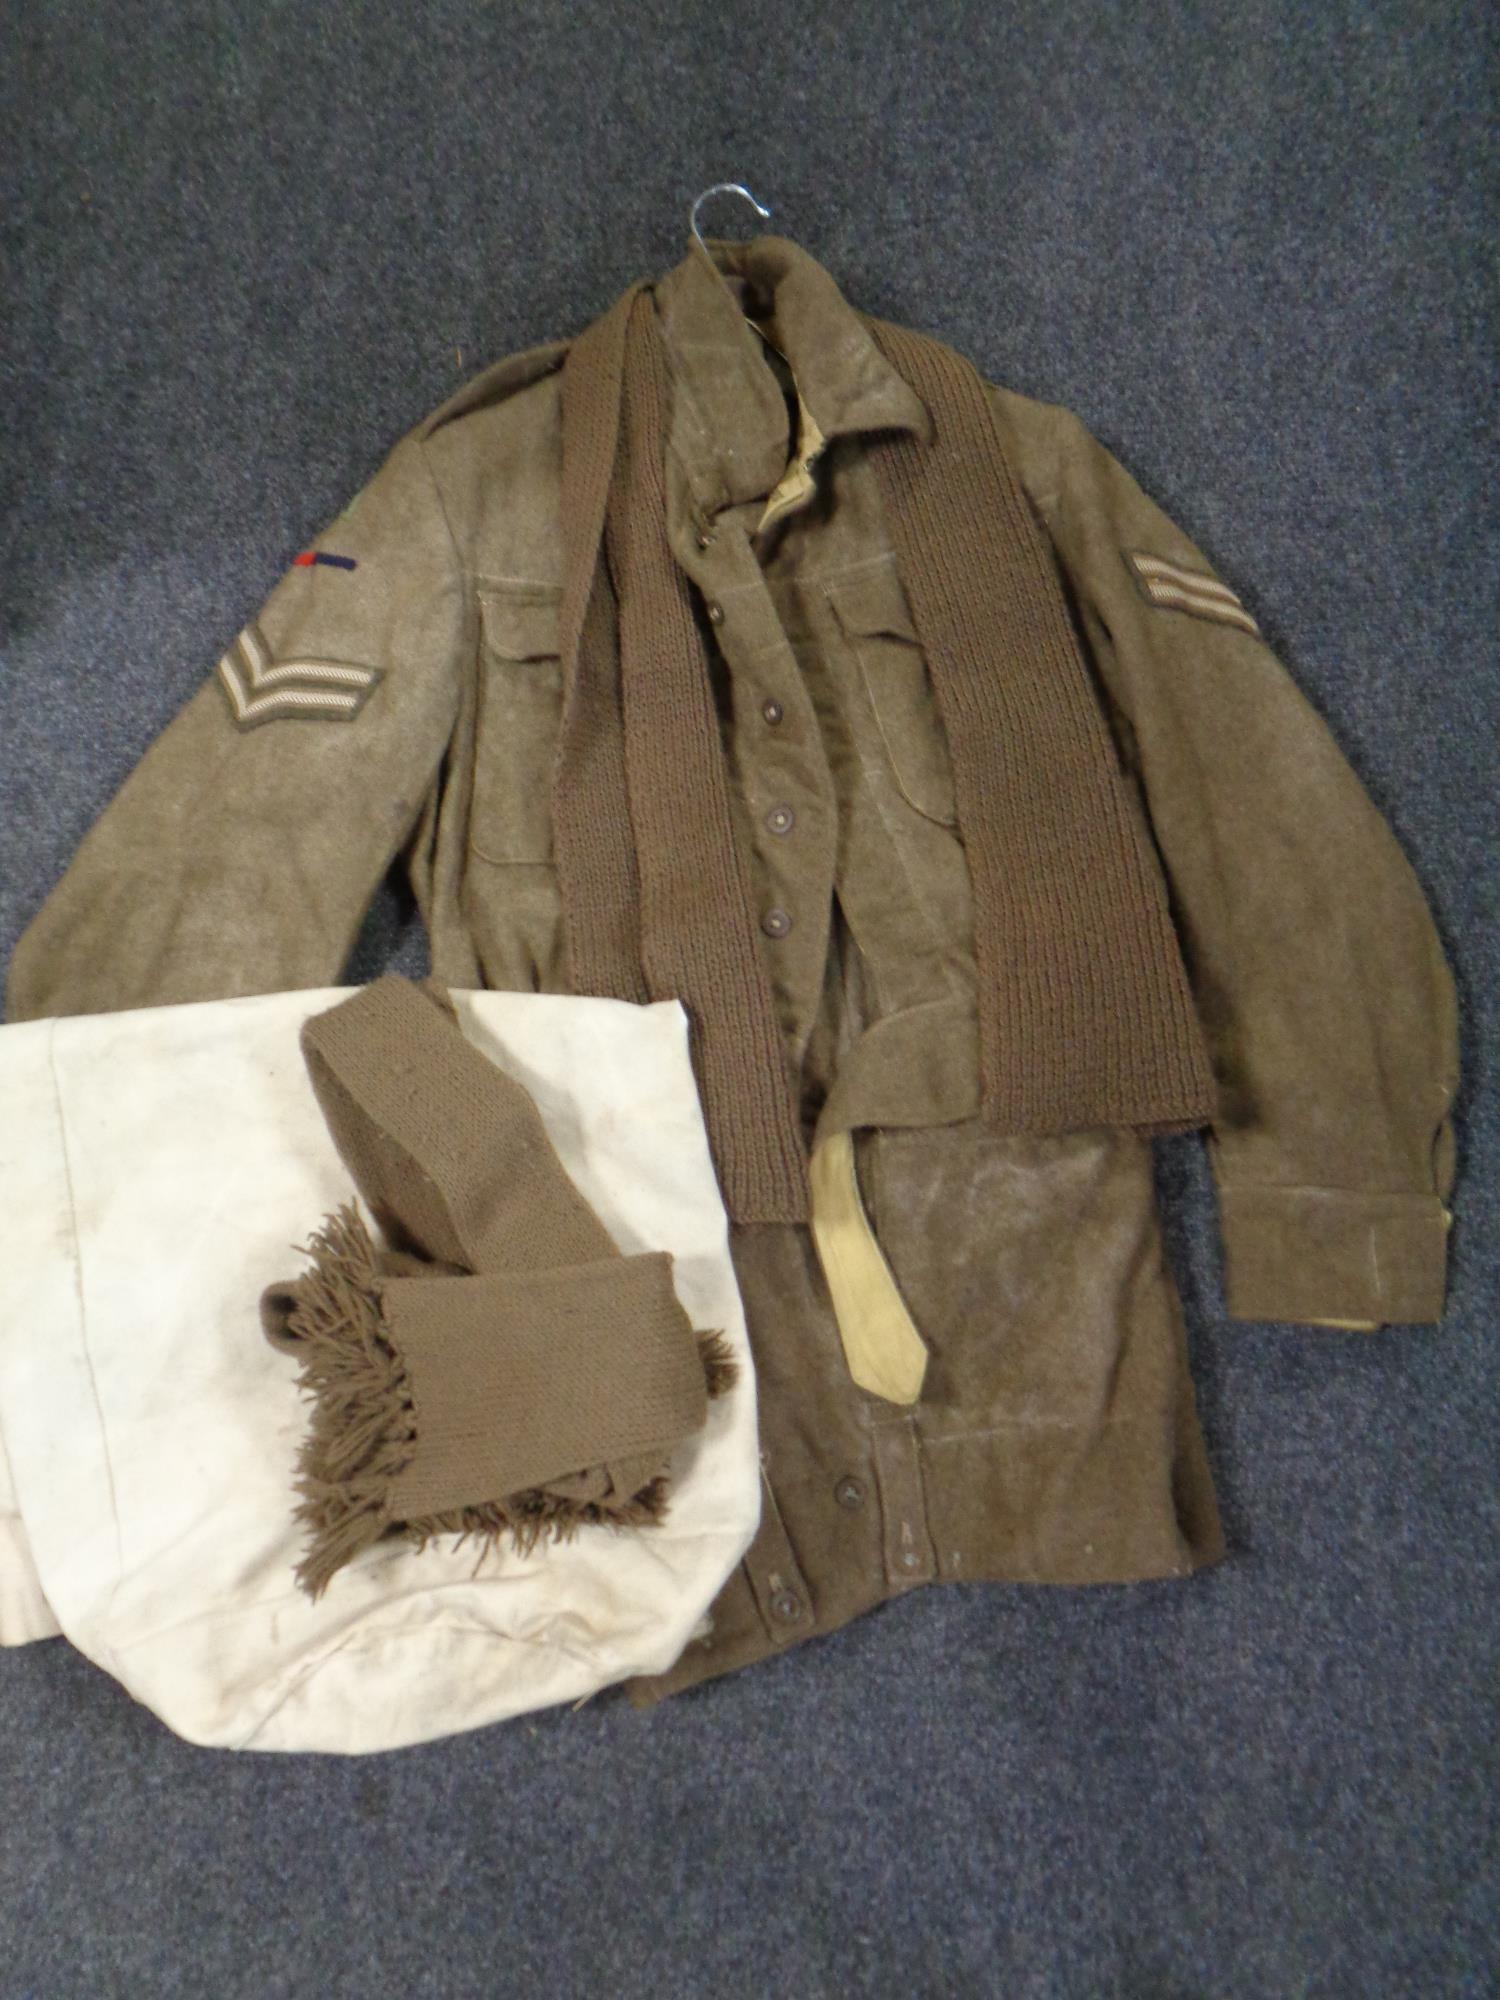 A vintage British Army corporal's two-piece uniform together with two woolen scarves and a canvas